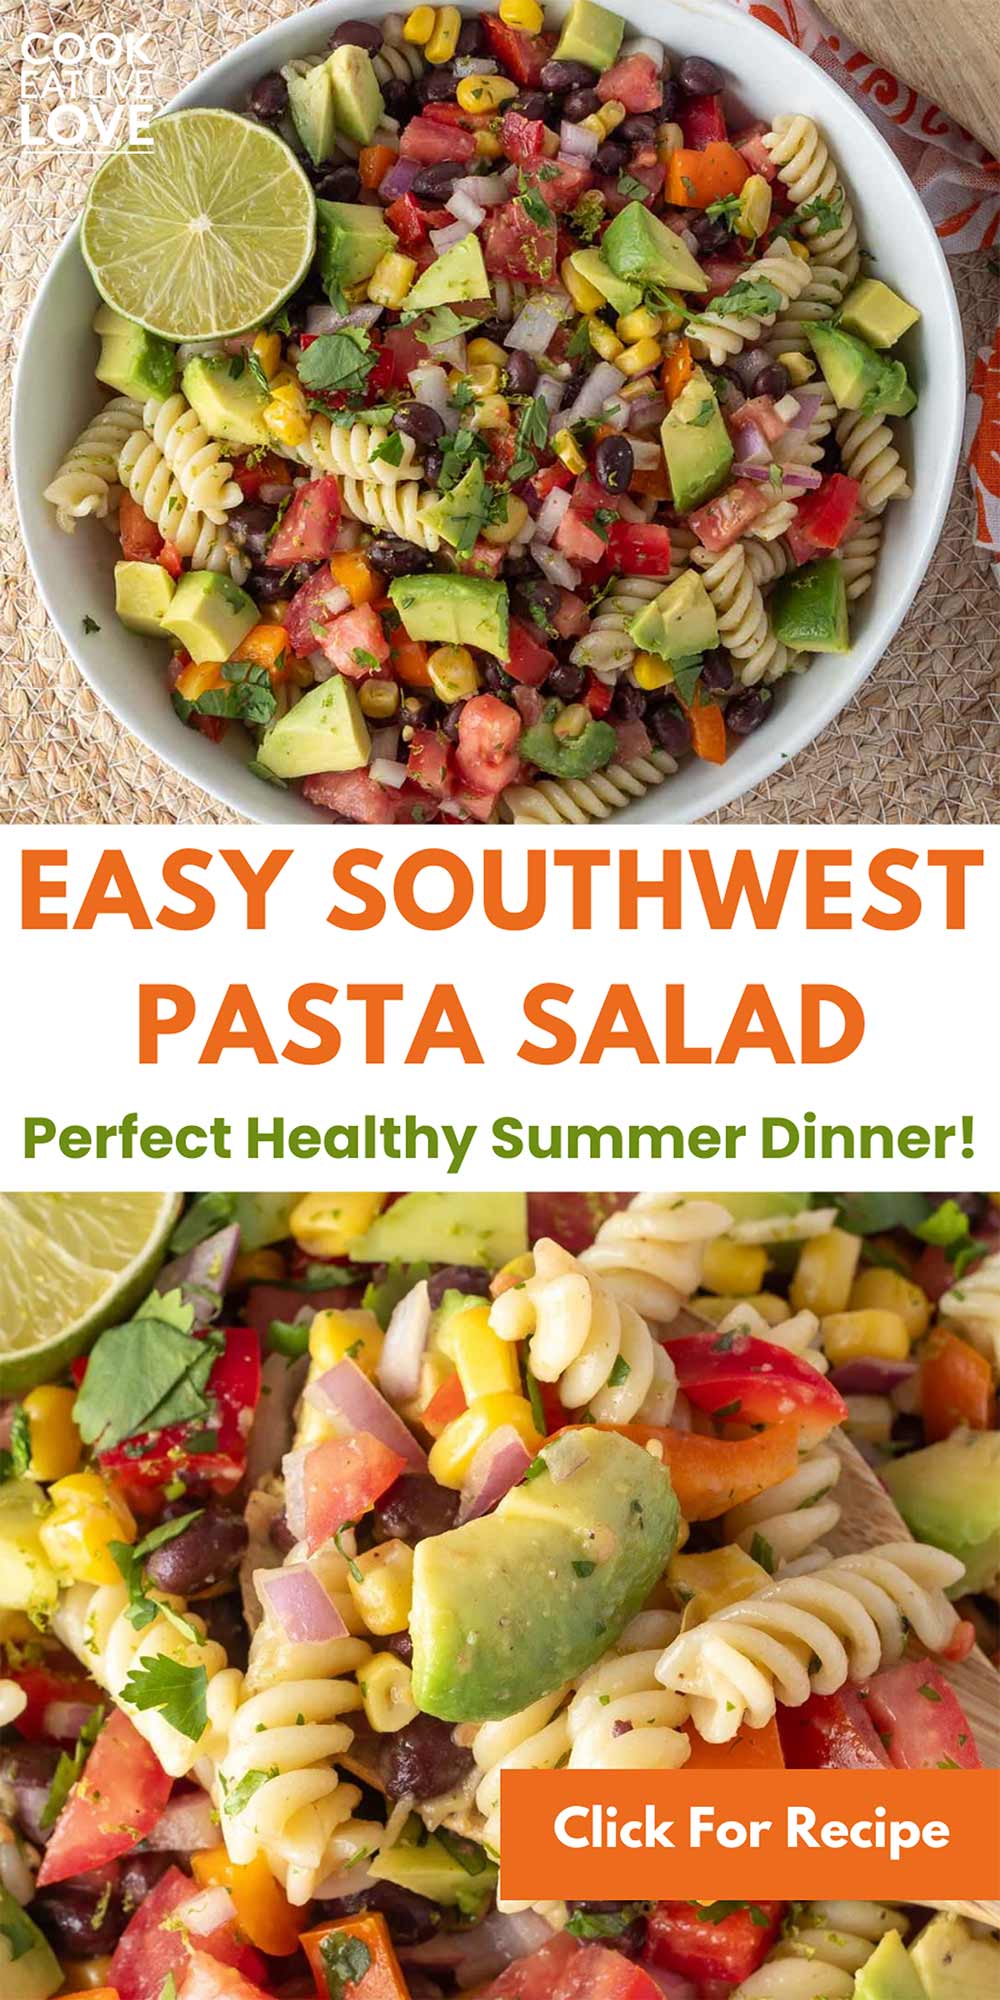 Pin for pinterest graphic with multiple images of pasta salad and text